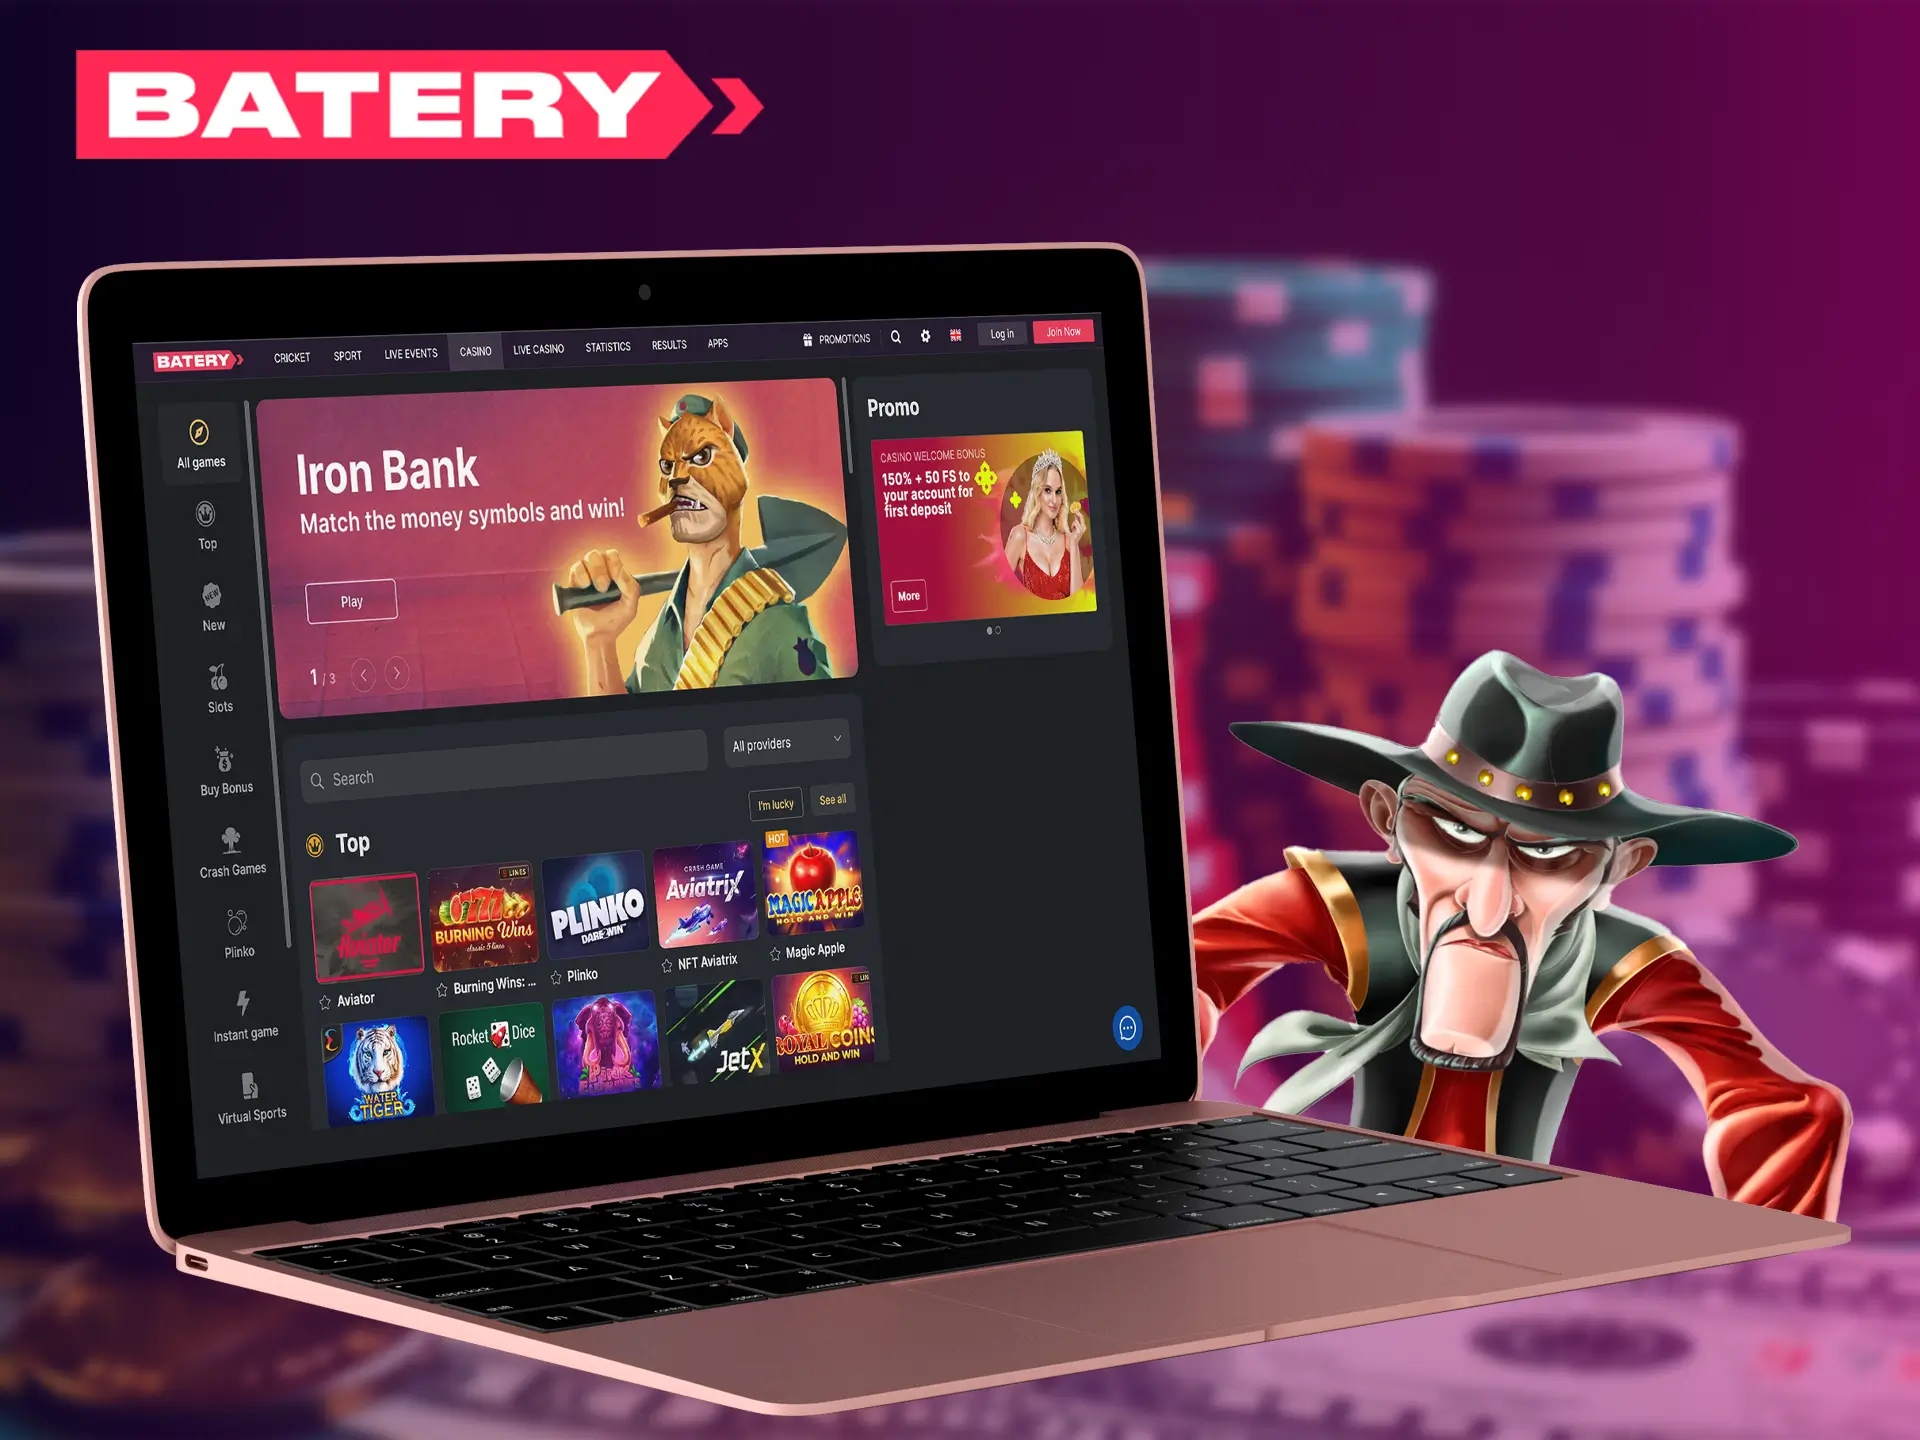 Use the clear and user-friendly interface of Batery Casino.